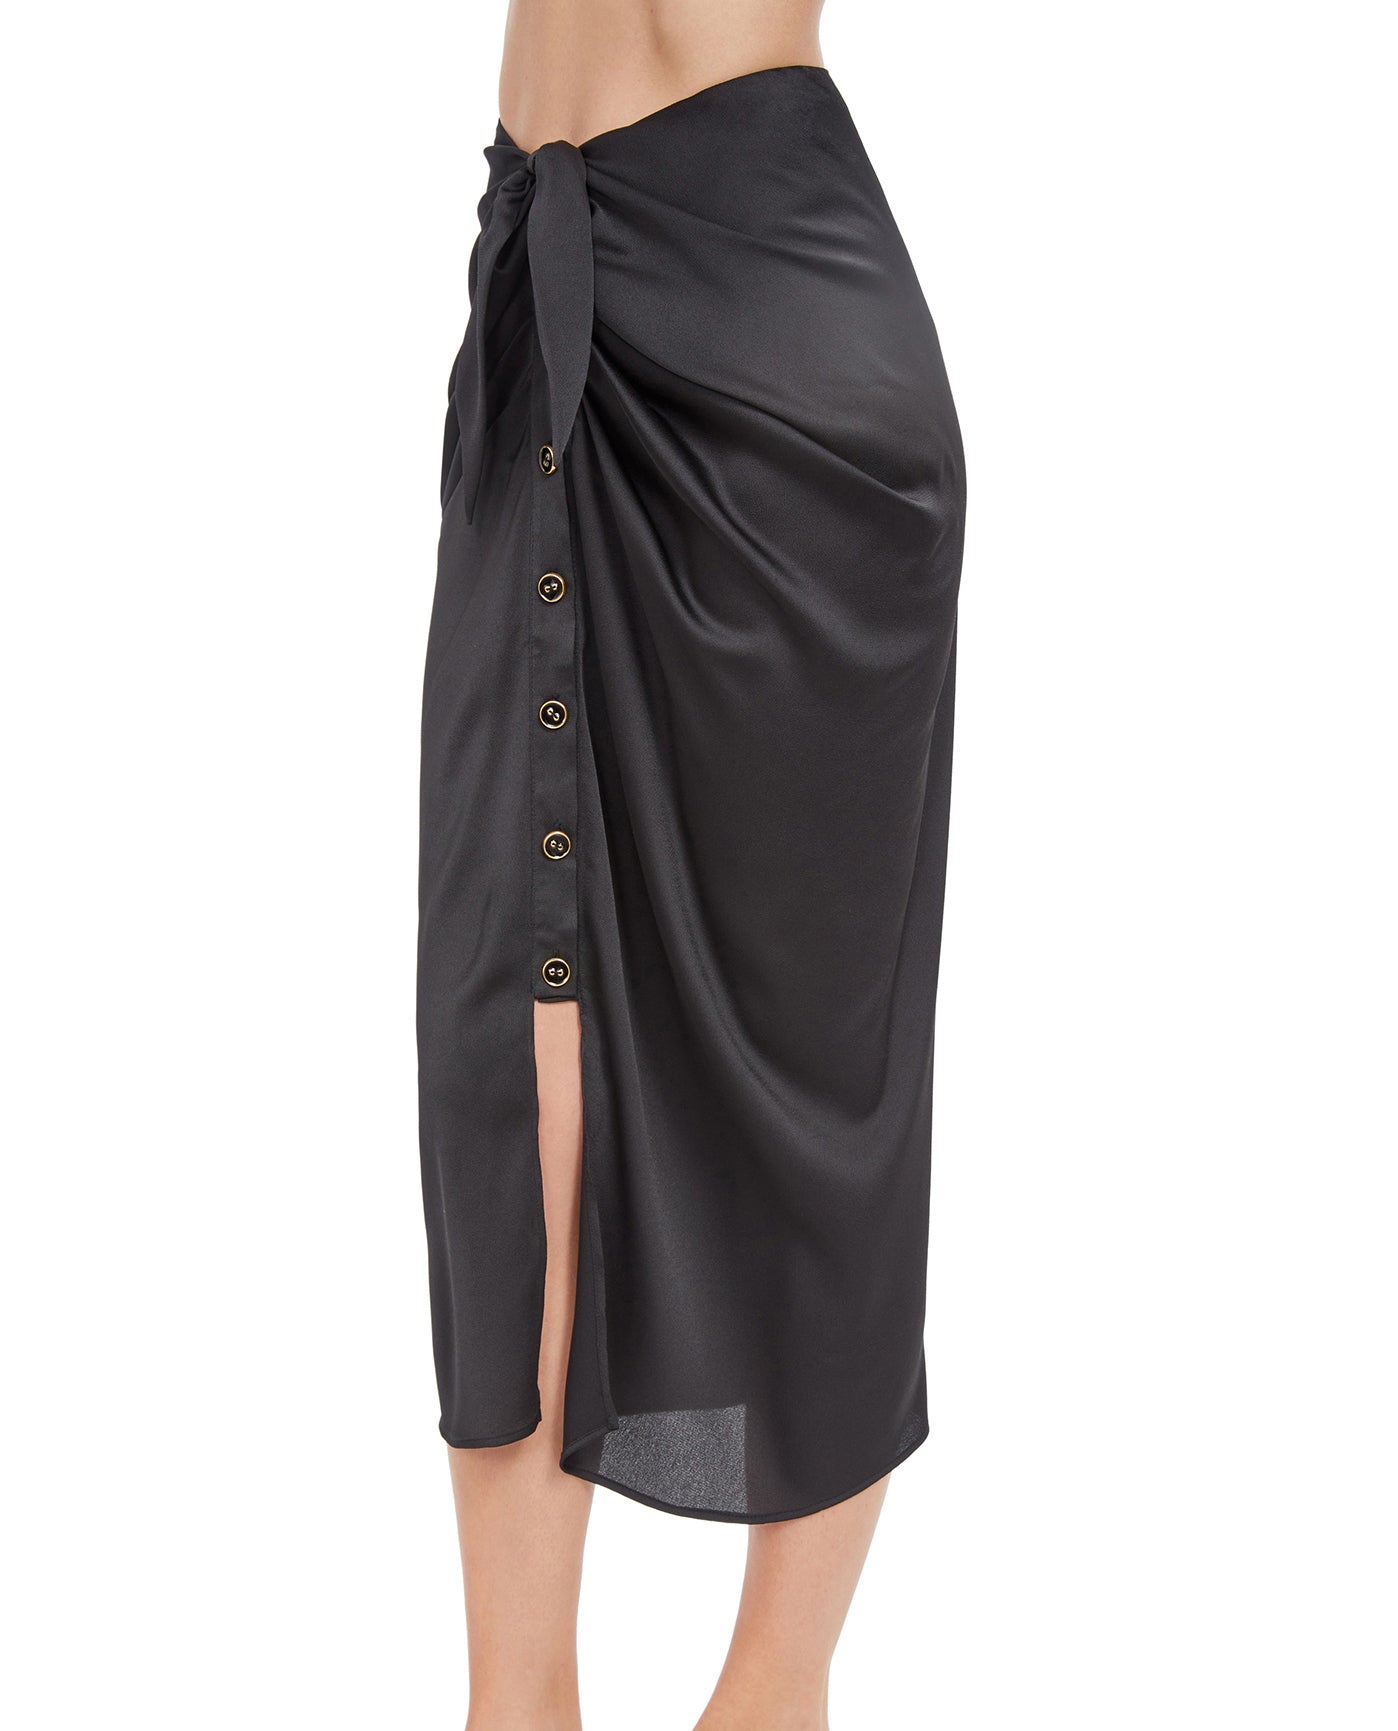 Side View View Of Gottex Classic High Class Tied Sarong-Style Cover Up Skirt | Gottex High Class Black